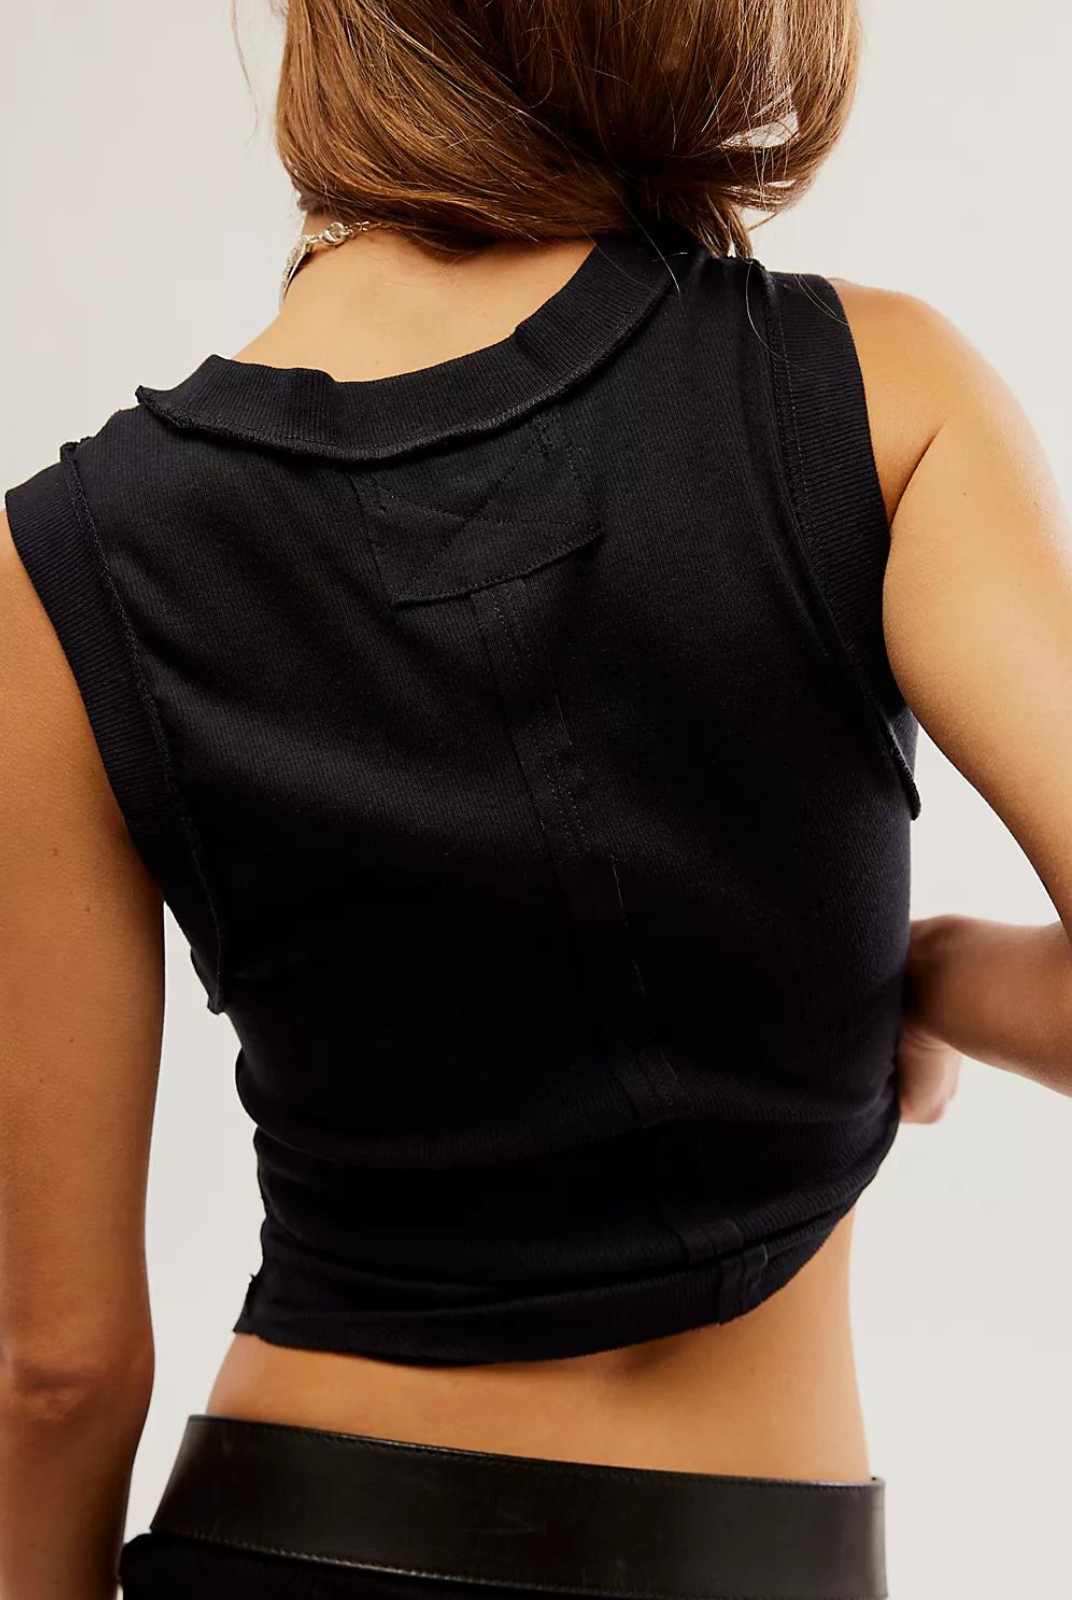 Free People Kate Tee- Black The ideal tank-inspired top, this sleeveless tee is featured in an effortless, goes-with-anything design with rounded bottom hem and exposed seaming for a true lived-in look.